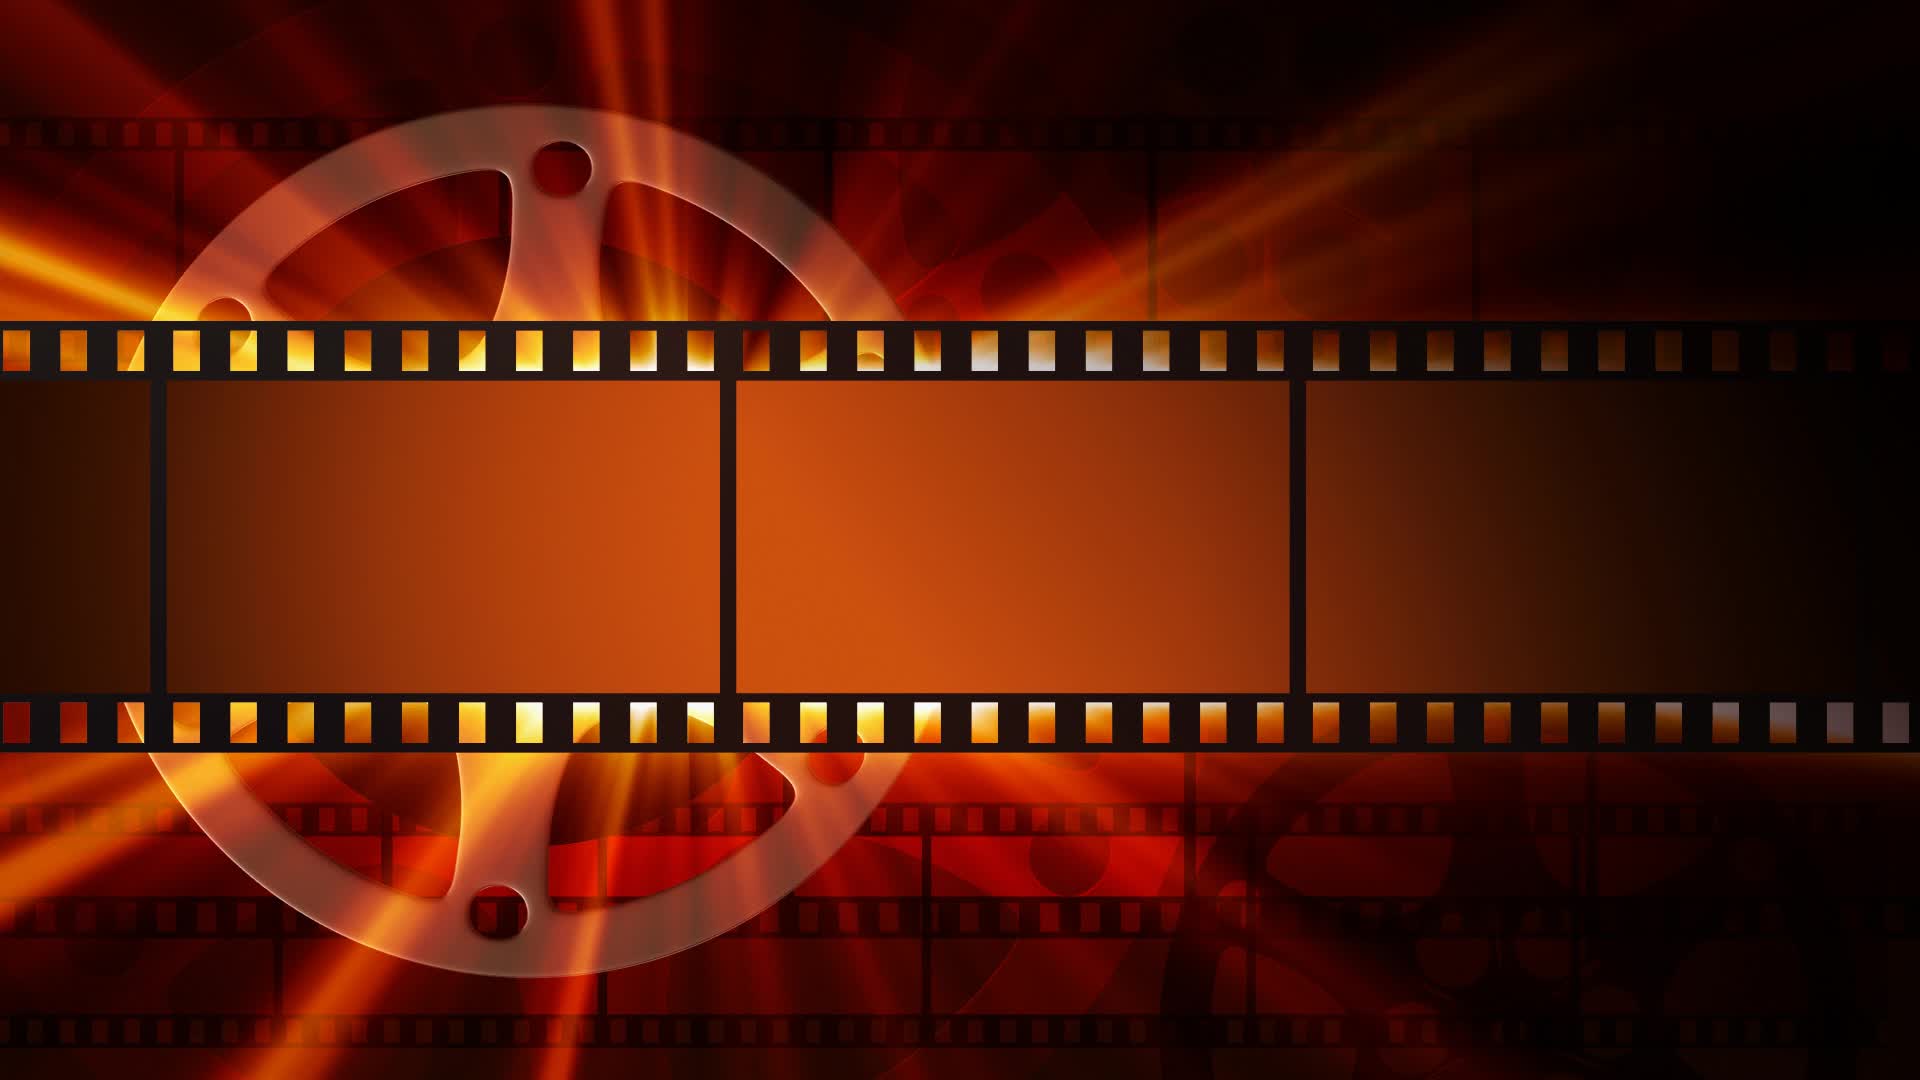 Film Reel Background Related Keywords amp Suggestions   Film